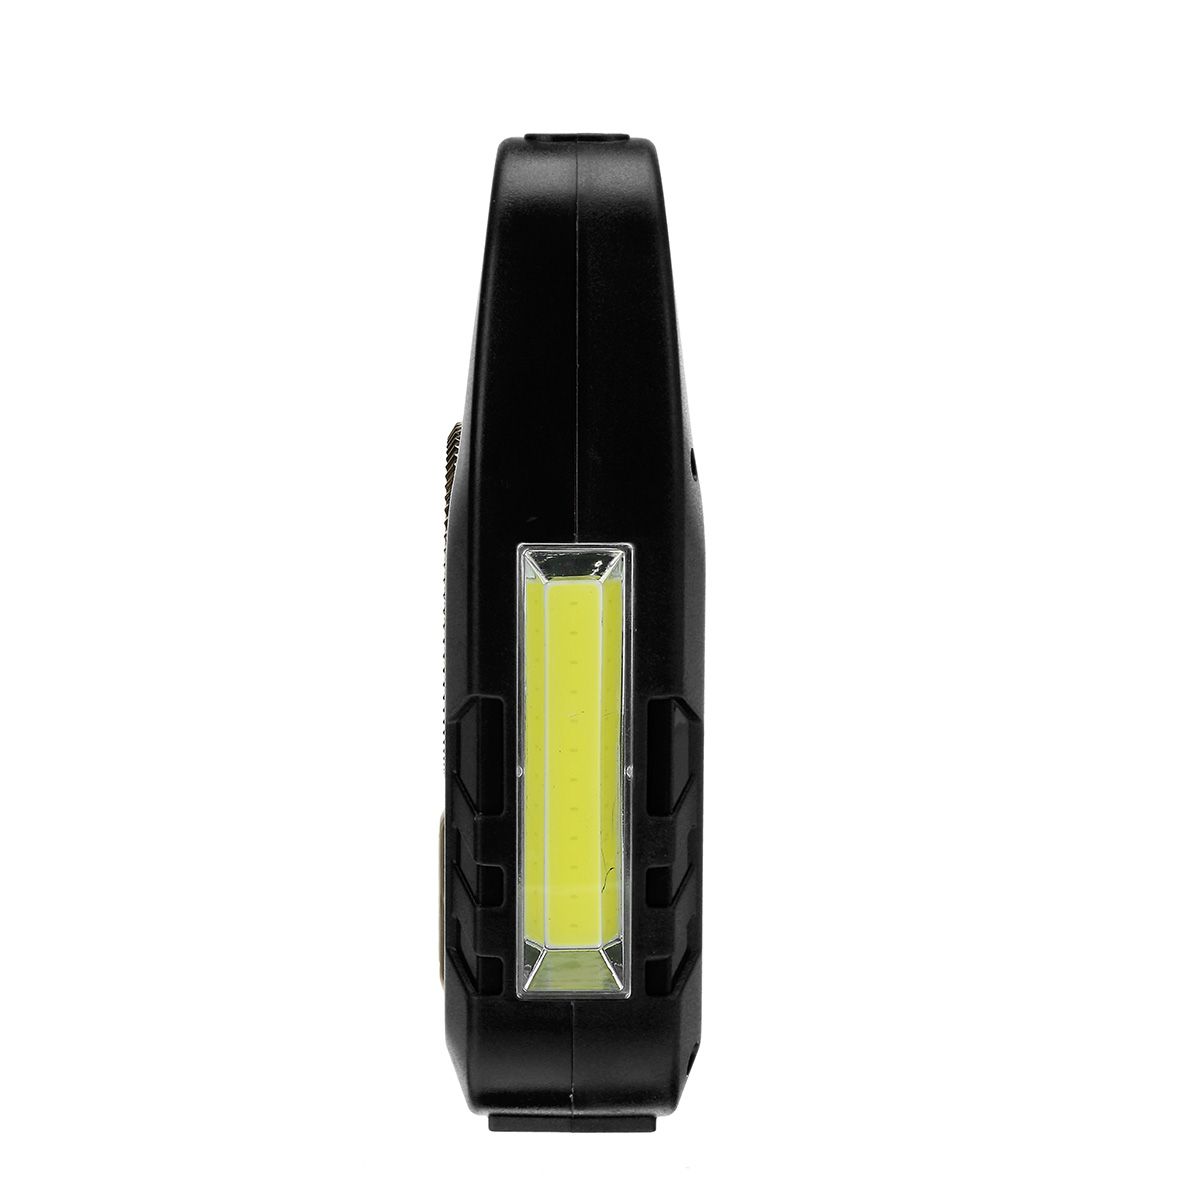 2IN-1-Solar-Portable-Camping-Light-LED-COB-Powered-Flashlights-USB-Rechargeable-Hand-Lamp-For-Hiking-1729925